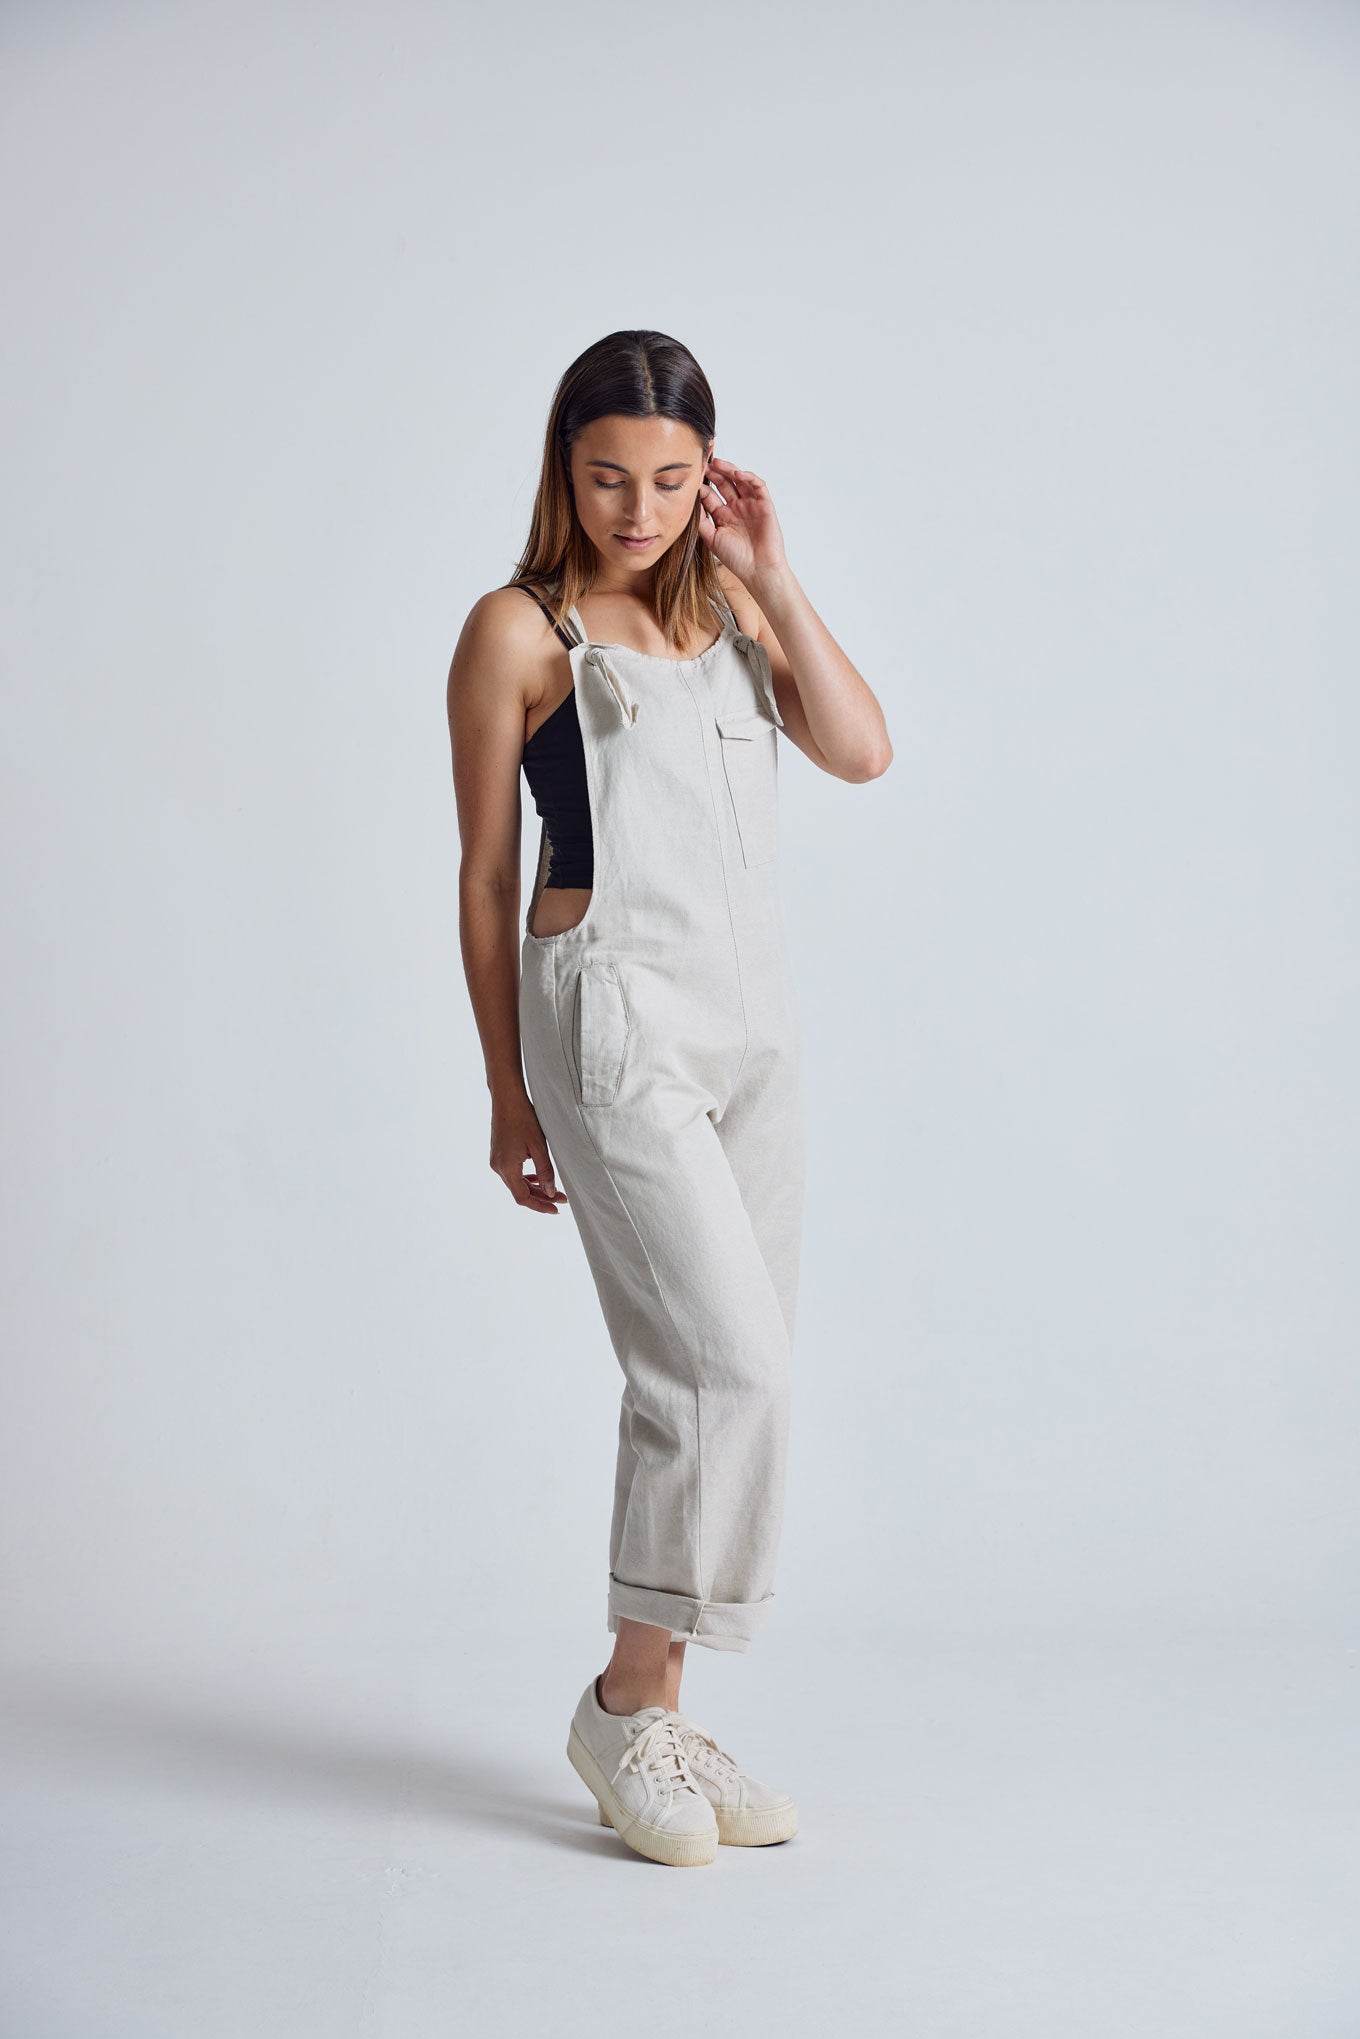 MARY-LOU Natural - GOTS Organic Cotton Dungarees by Flax & Loom, SIZE 4 / UK 14 / EUR 42